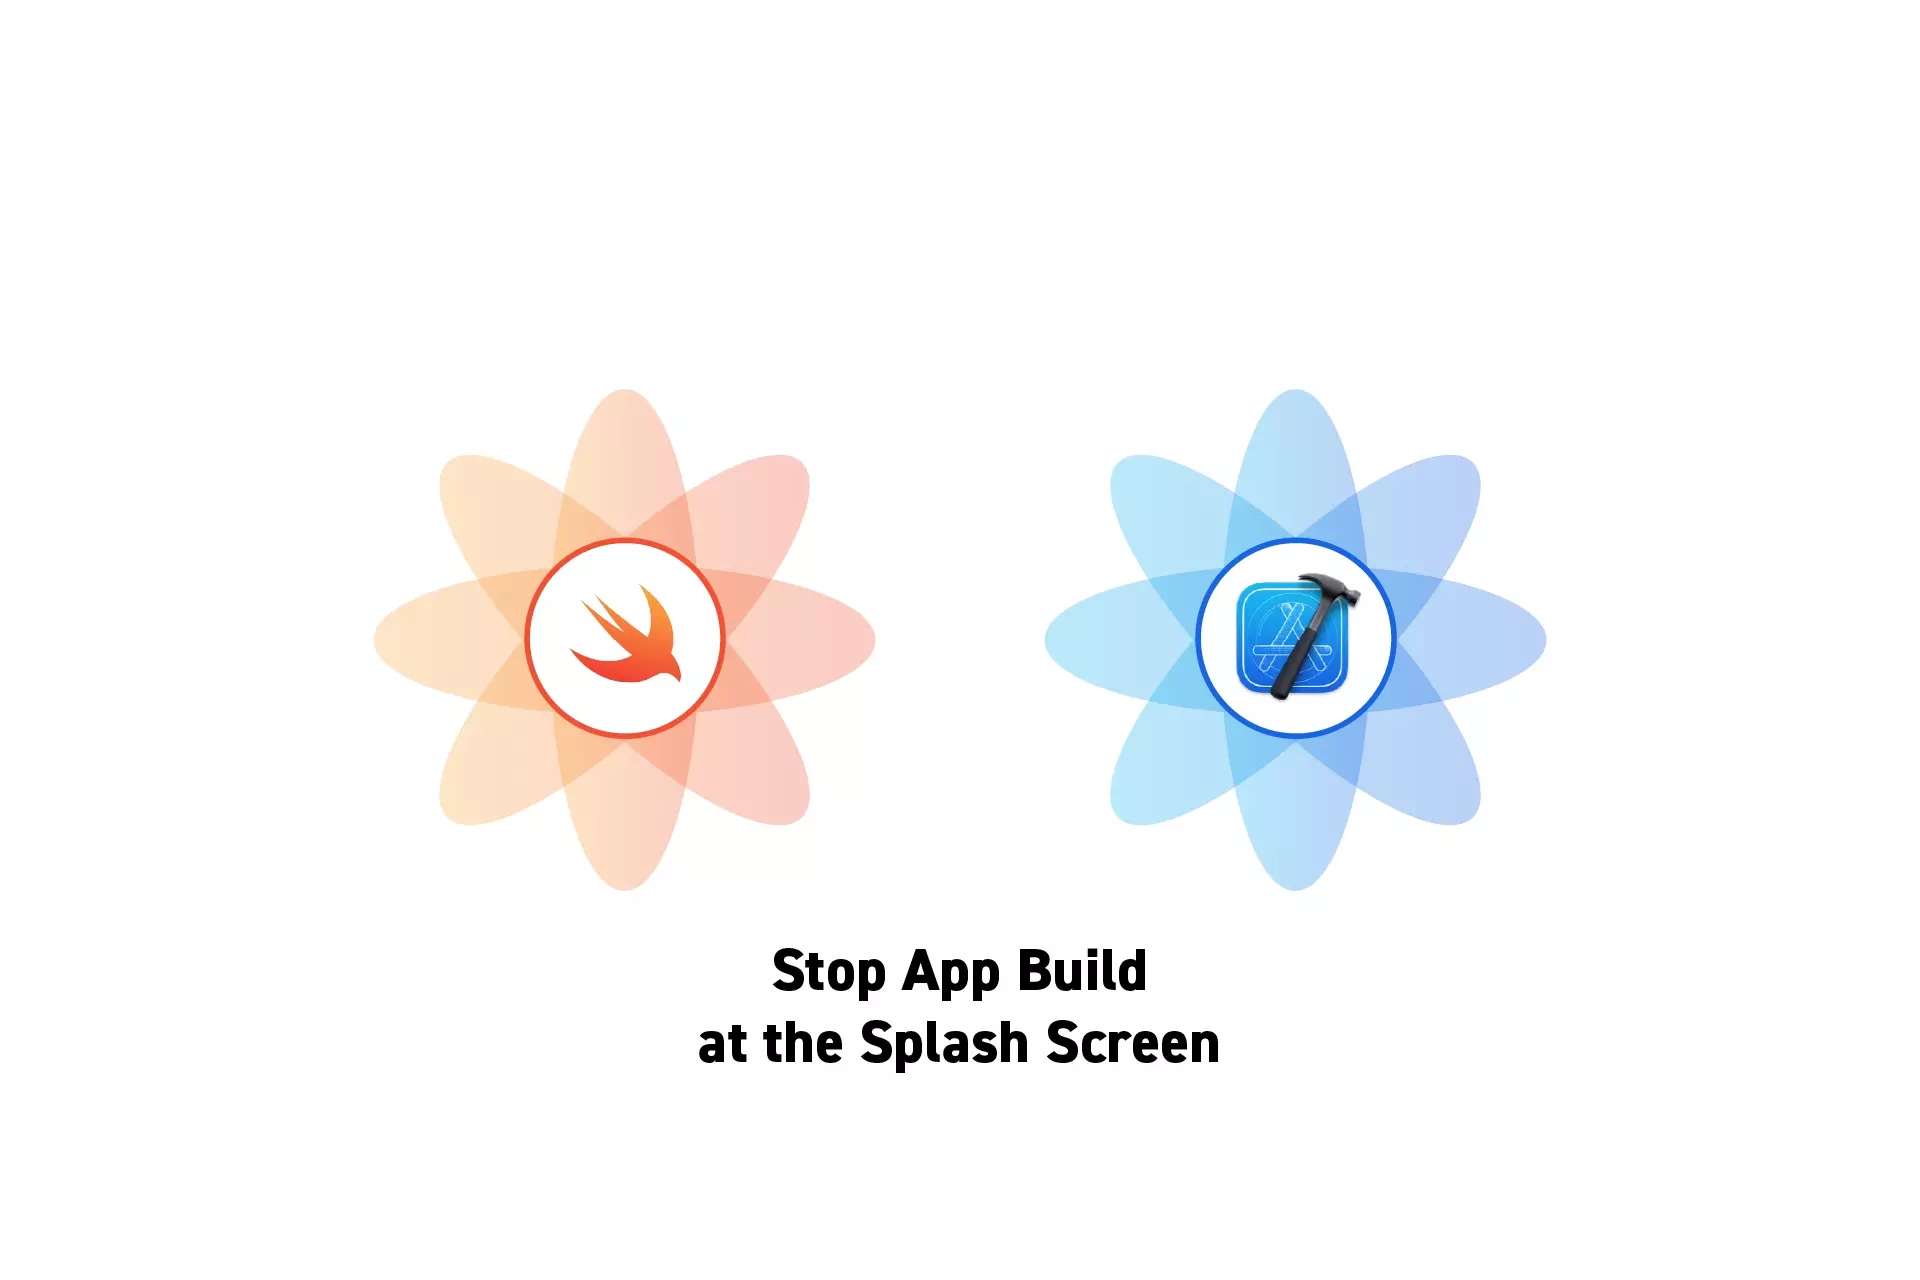 Two flowers that represent Swift and XCode side by side. Beneath them sits the text “Stop App Build at the Splash Screen”.